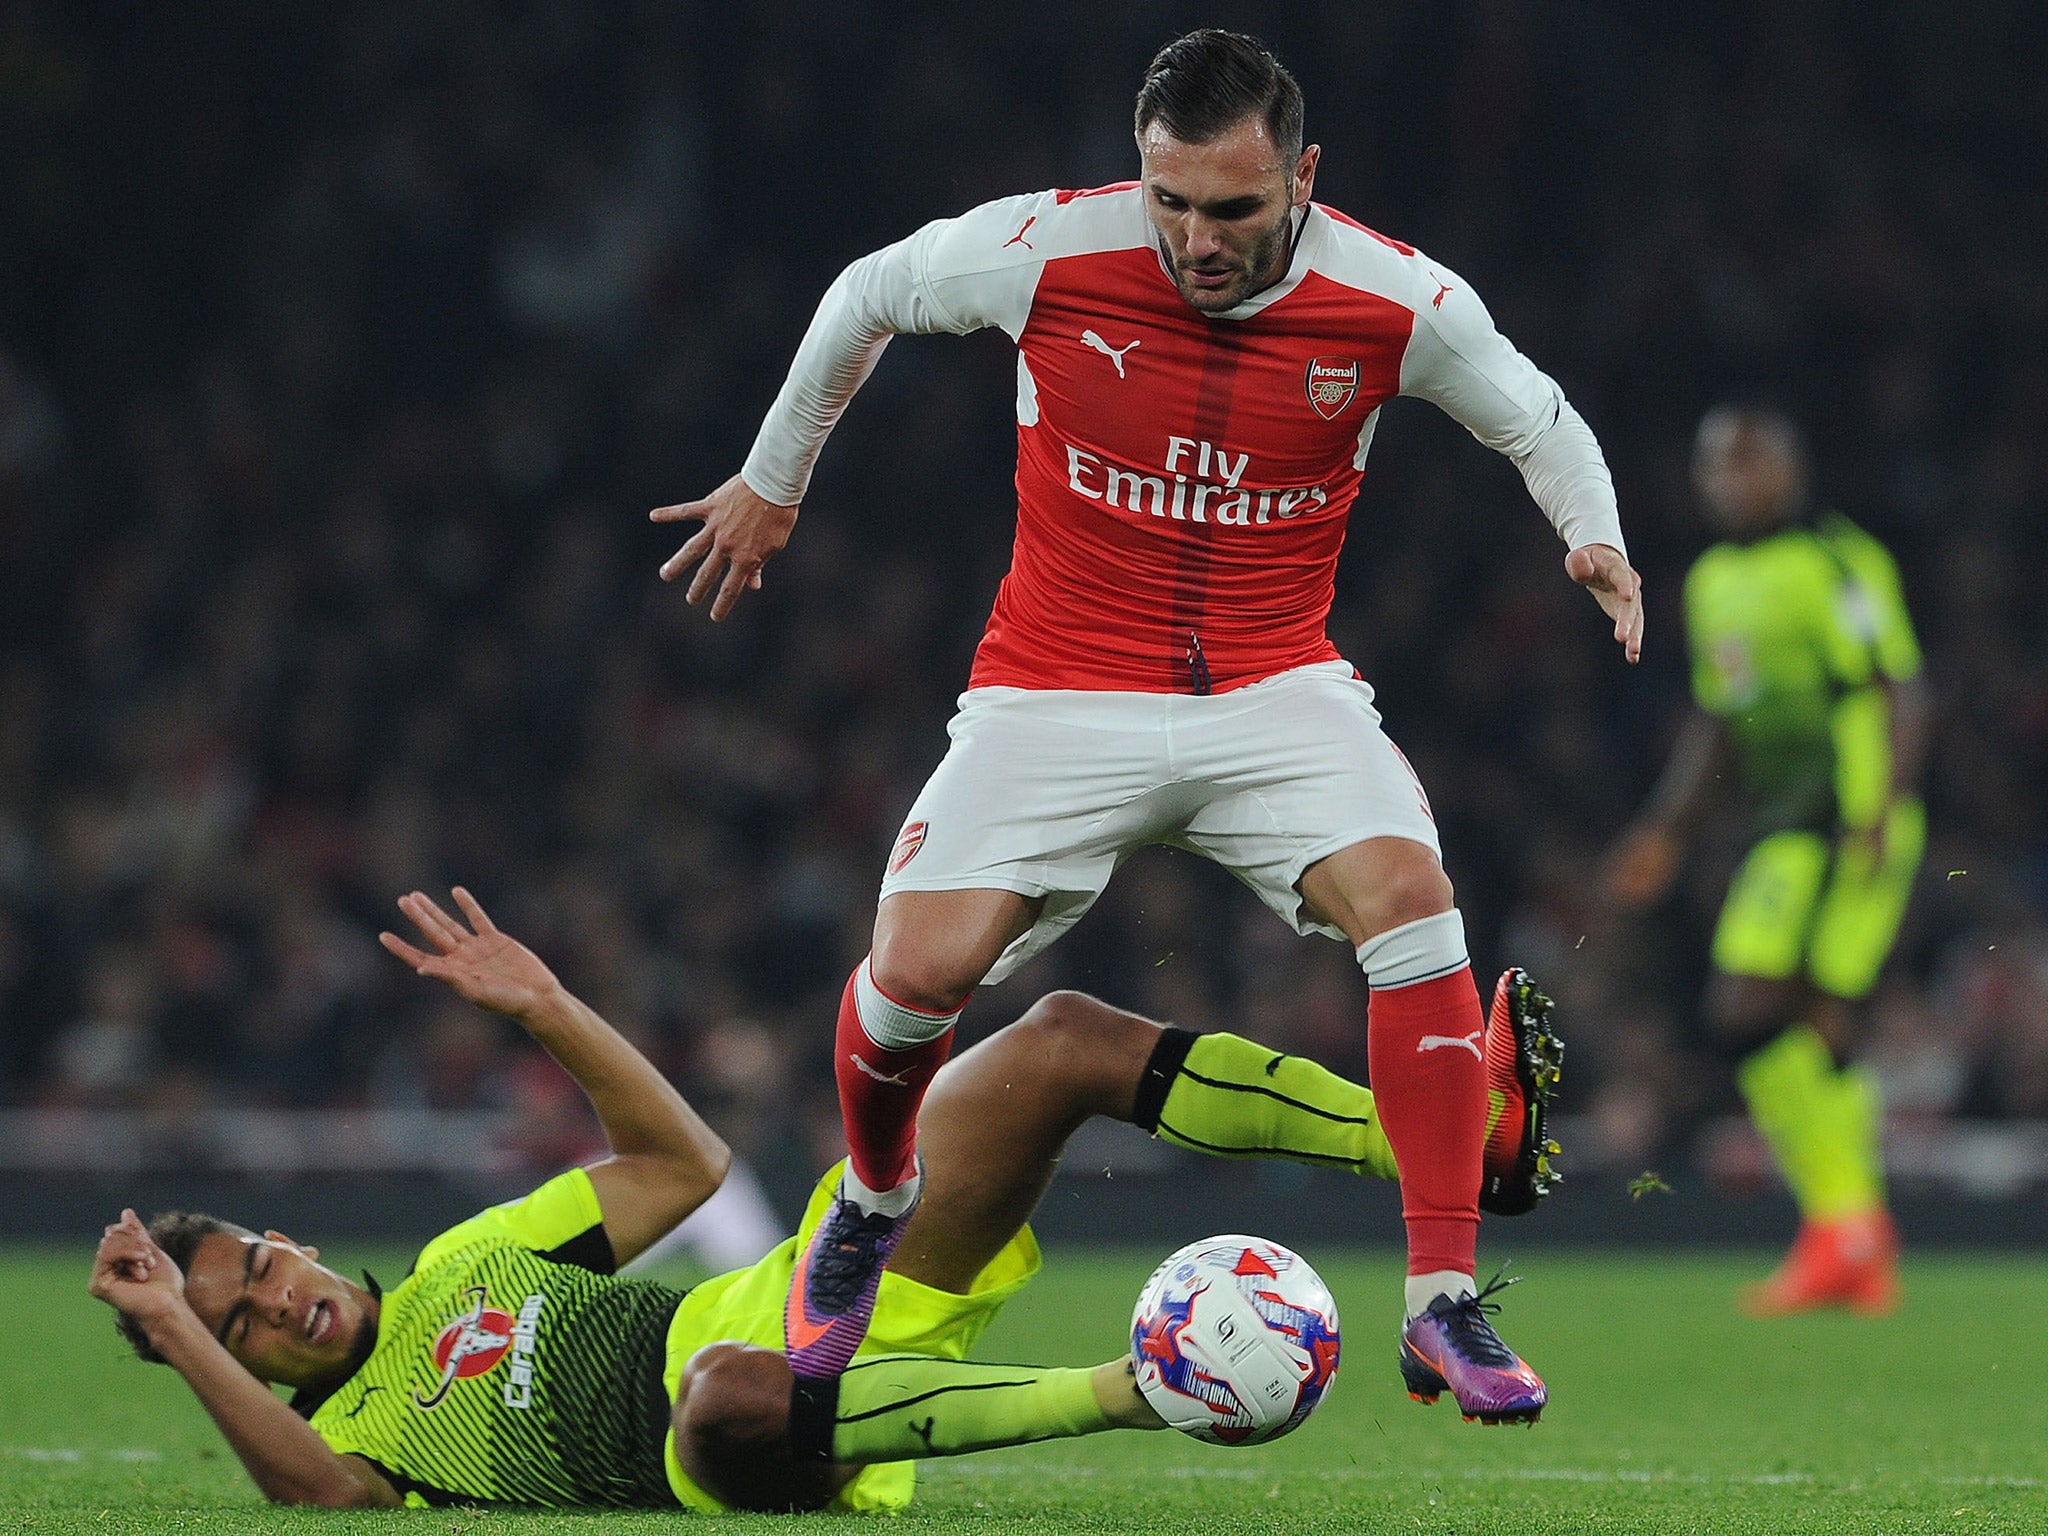 Arsenal will be without Lucas Perez until Christmas due to ankle ligament damage